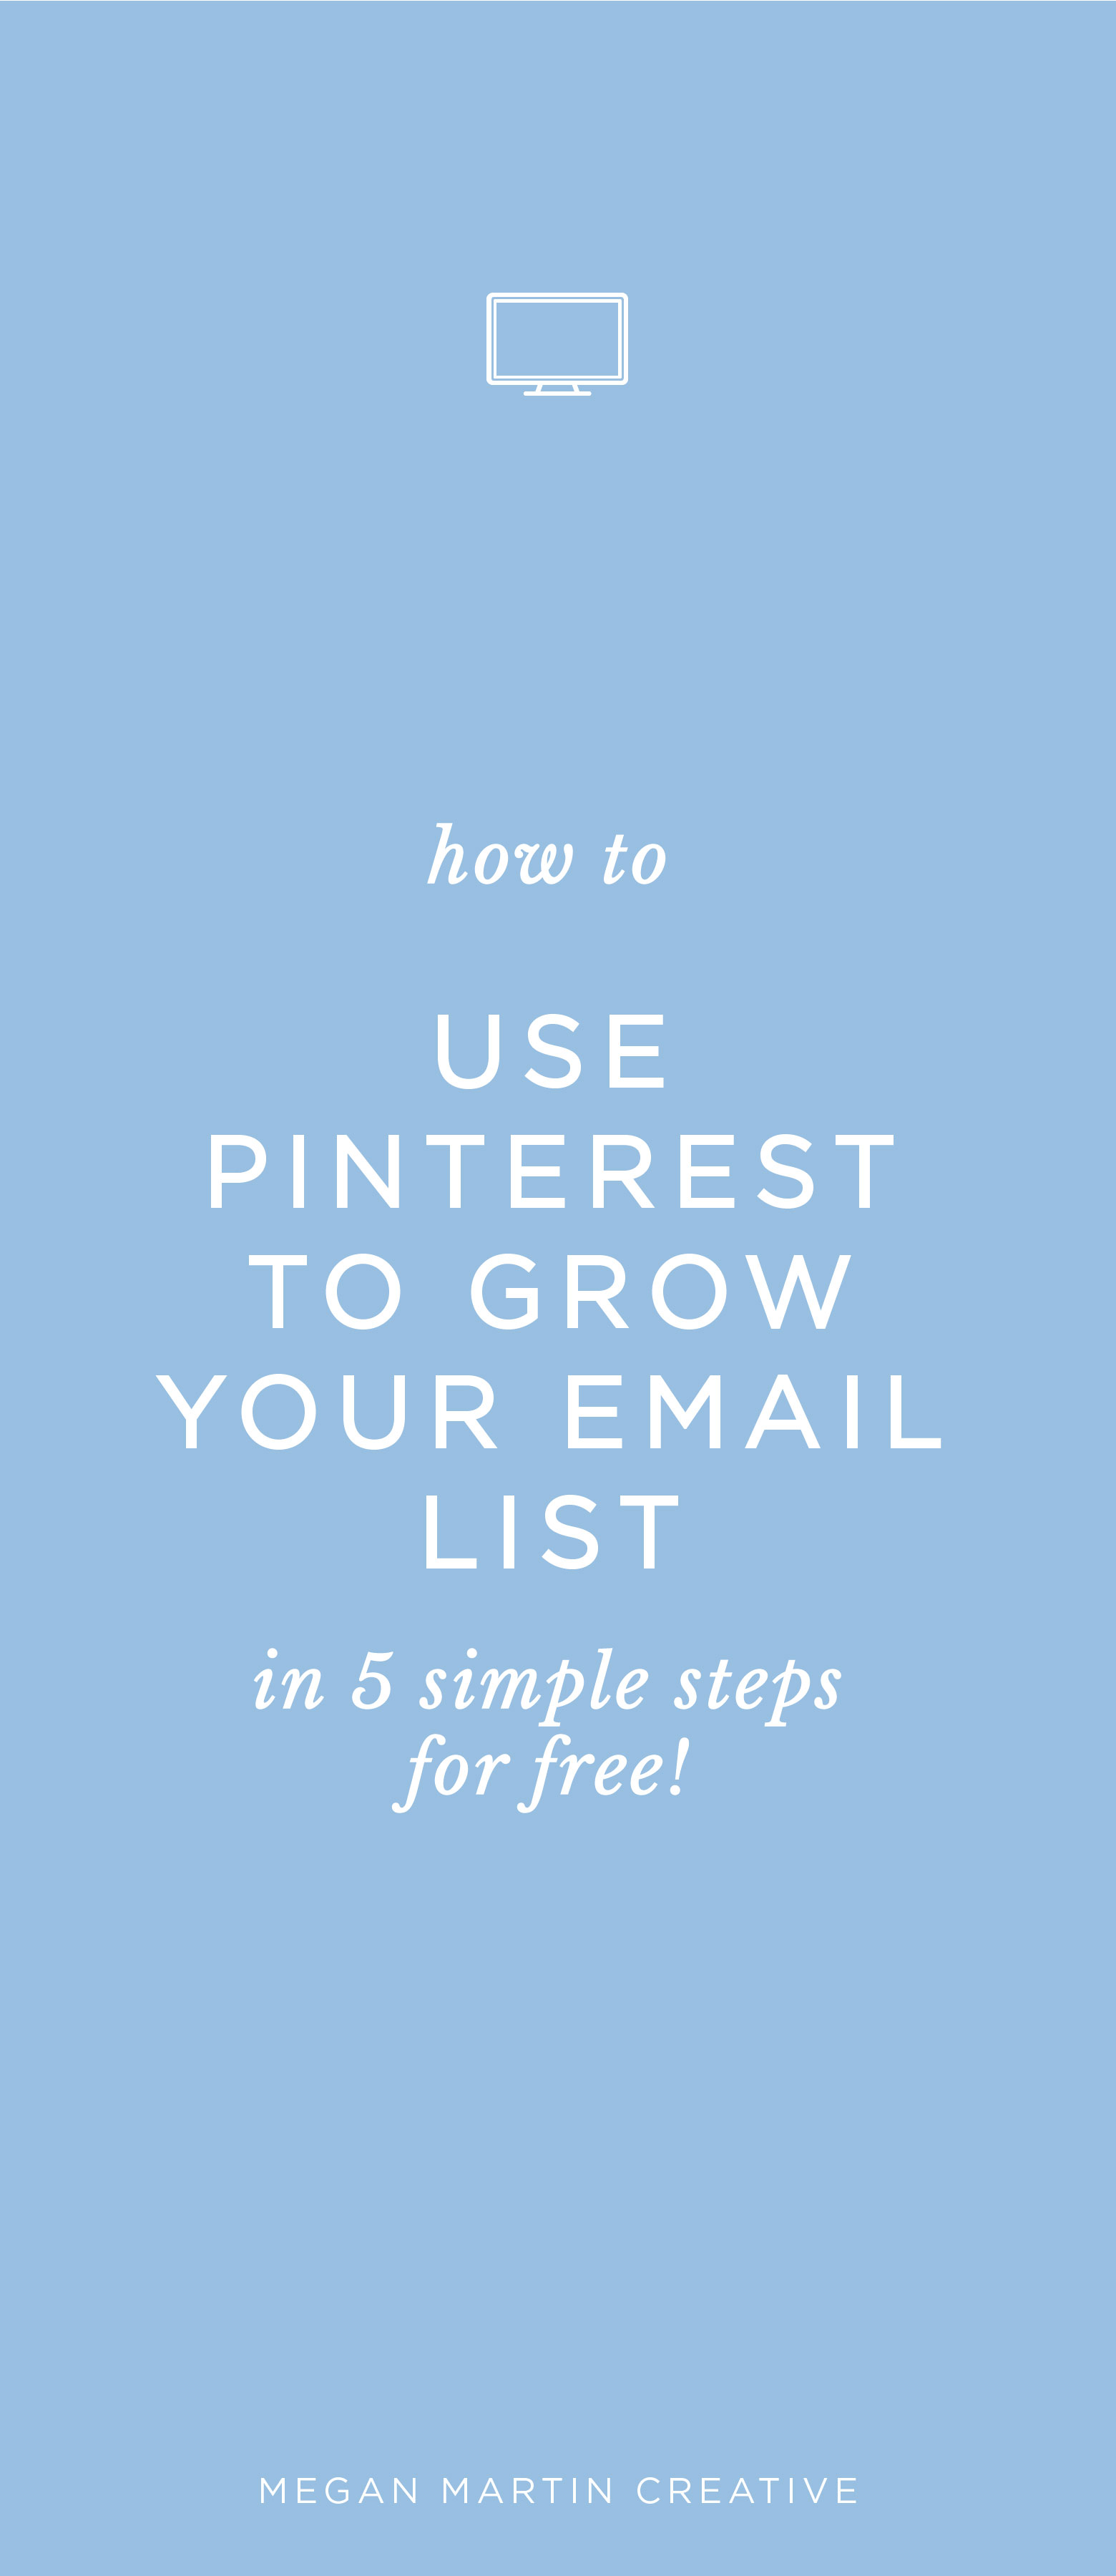 how to grow your email list for free with Pinterest by Vanessa Kynes, how to grow your blog, website traffic, convertkit, mailchimp, tailwind, marketing tips